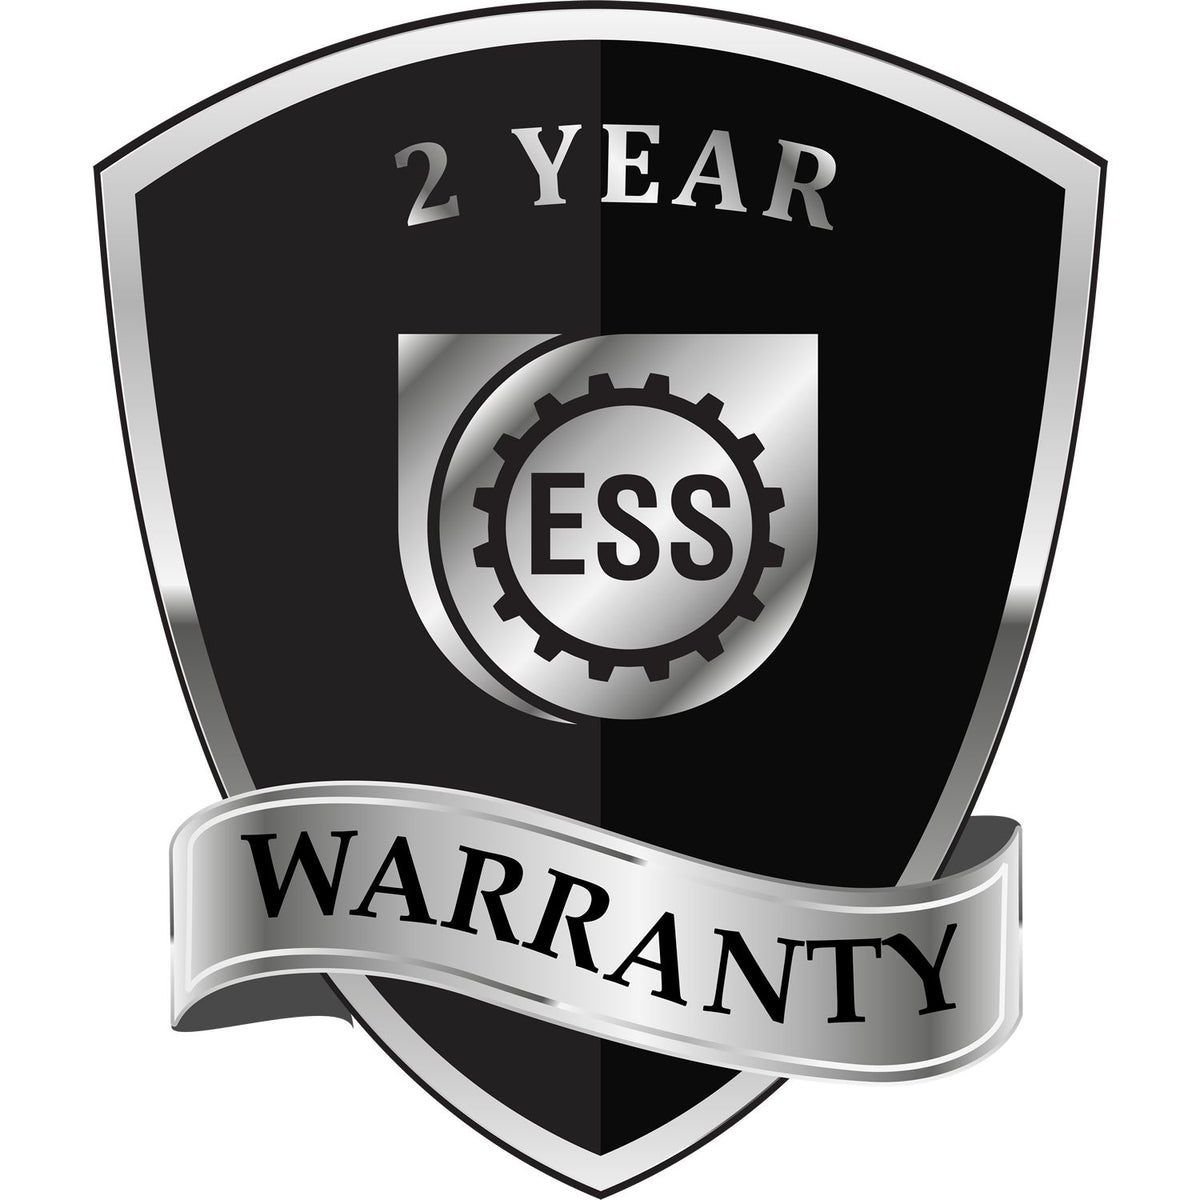 A badge or emblem showing a warranty icon for the Handheld Texas Professional Engineer Embosser